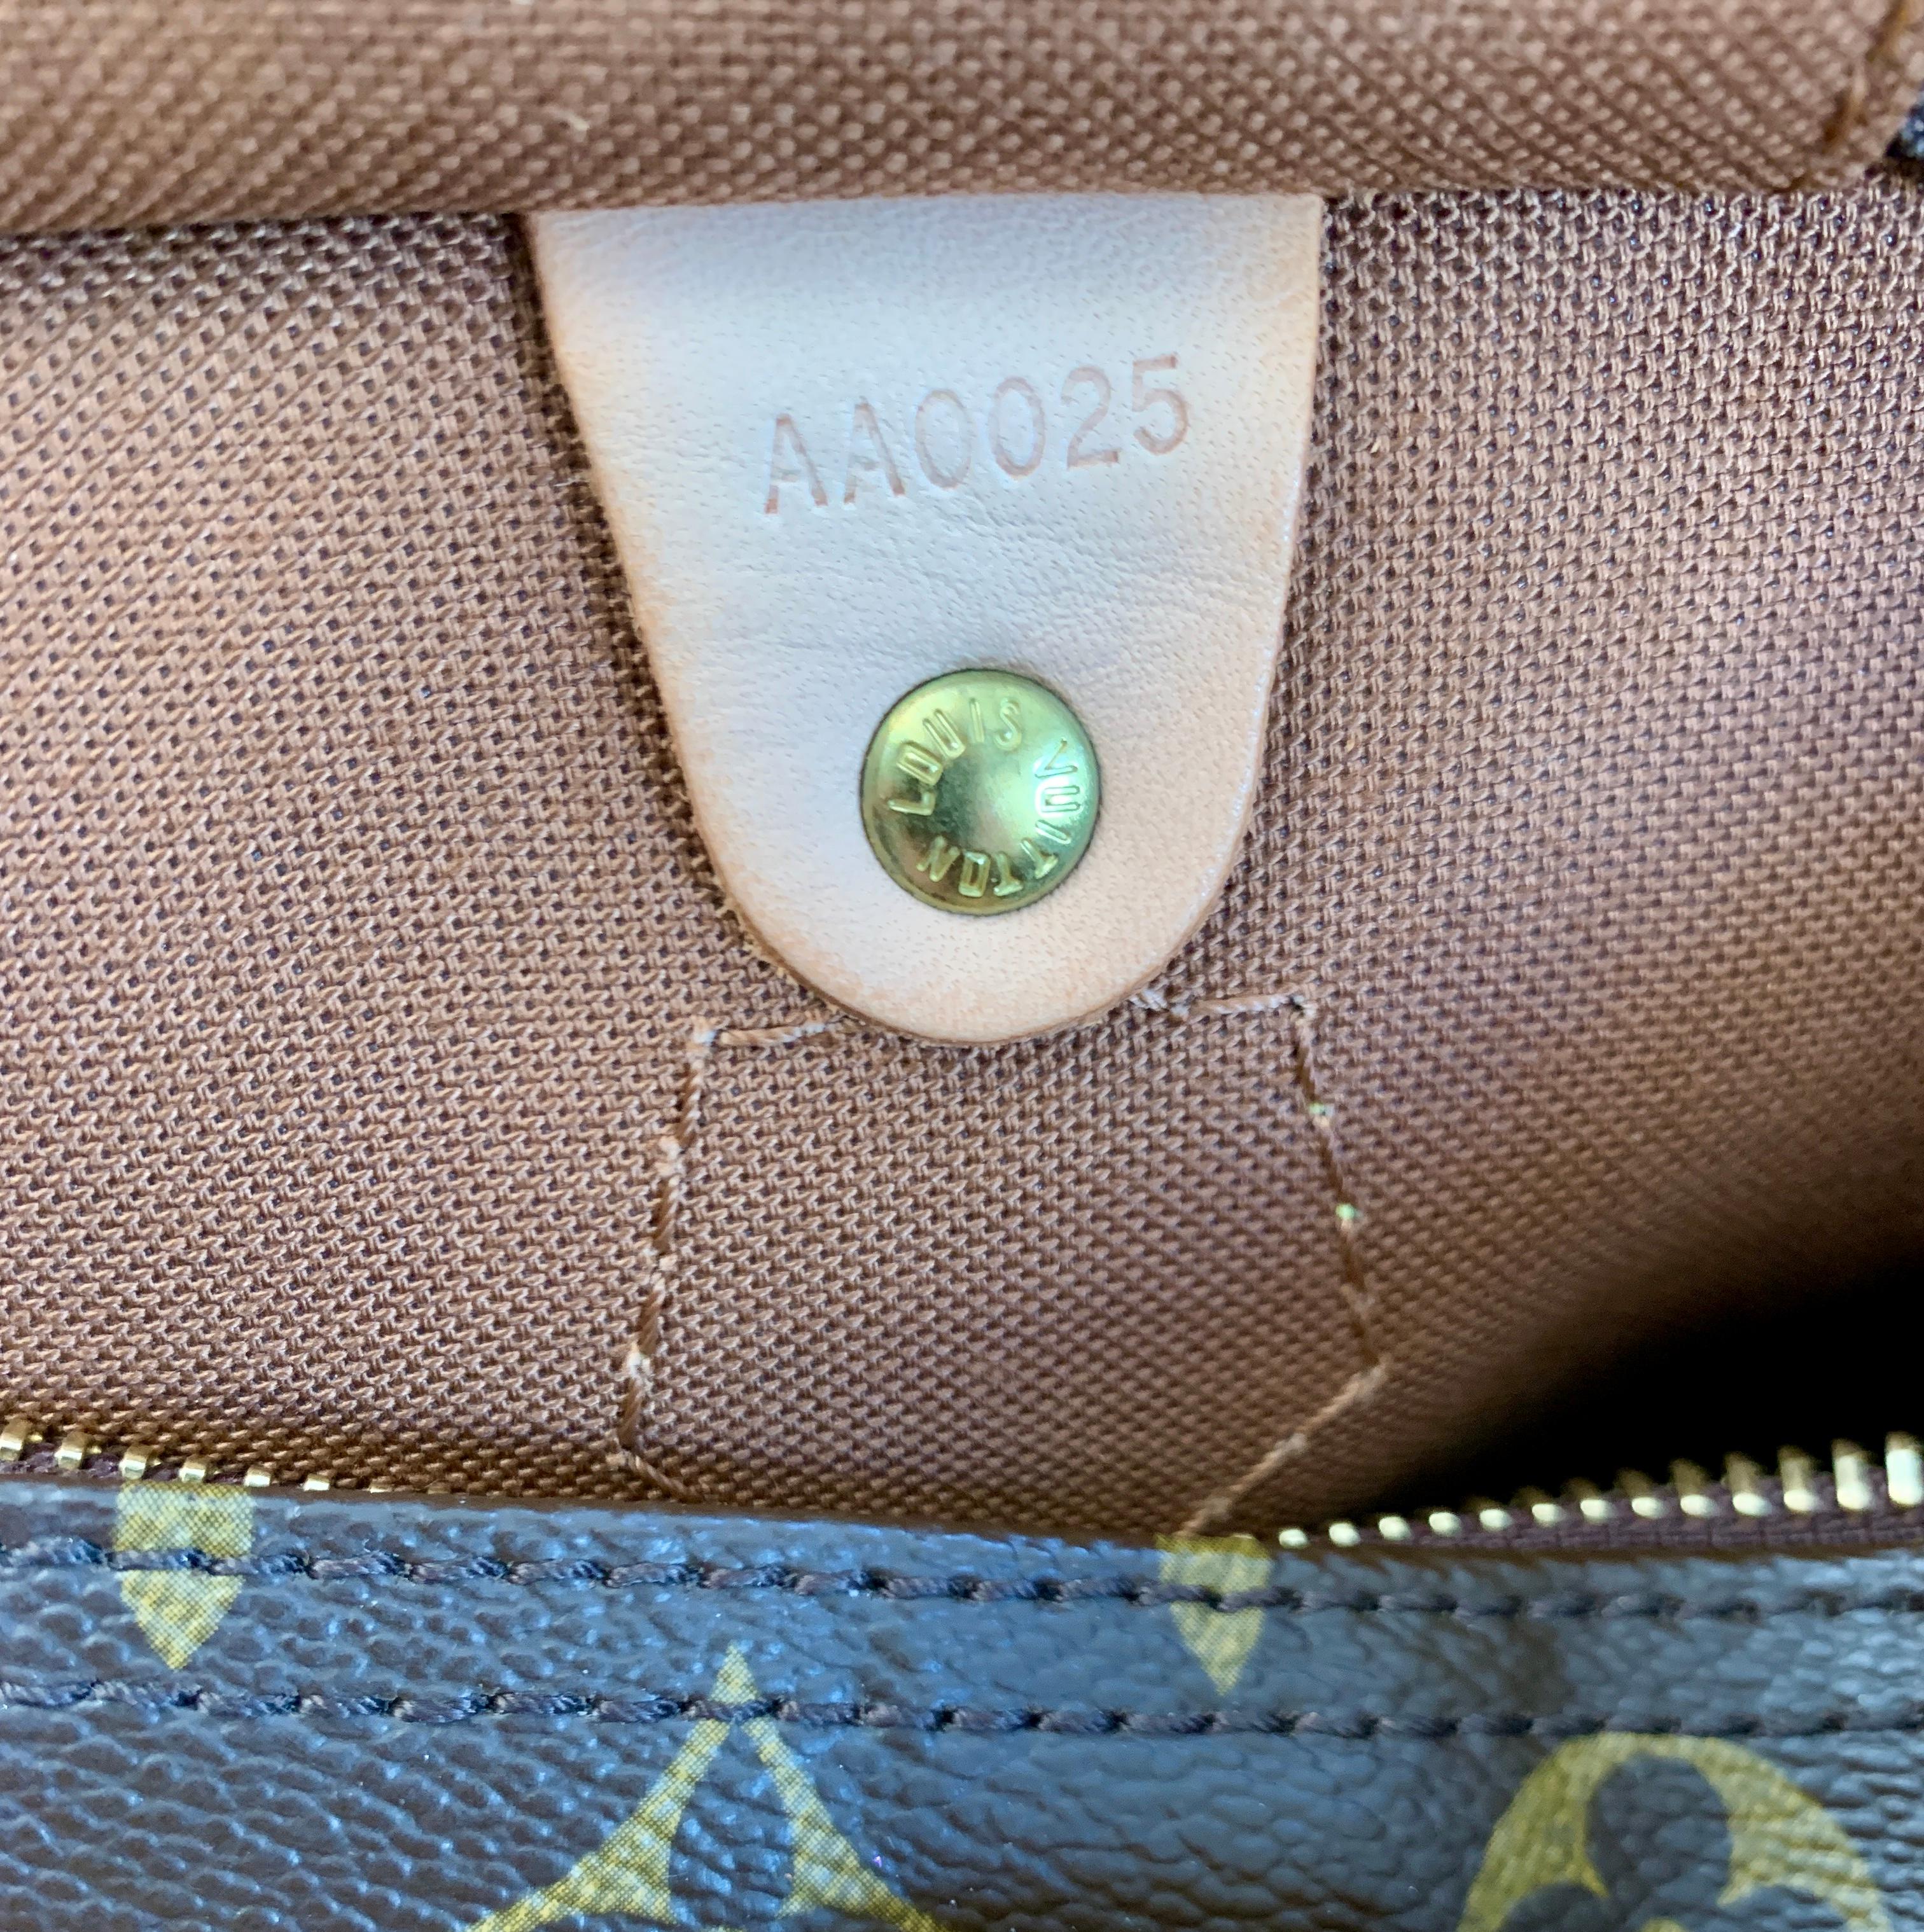 A Louis Vuitton logo-printed Louis Vuitton Speedy 30  with leather trim with bring a touch of heritage luxury wherever you carry it.
Over all Excellent  condition, Like  new
No stain , no fading , lining is in great shape
It will come  in  a Louis